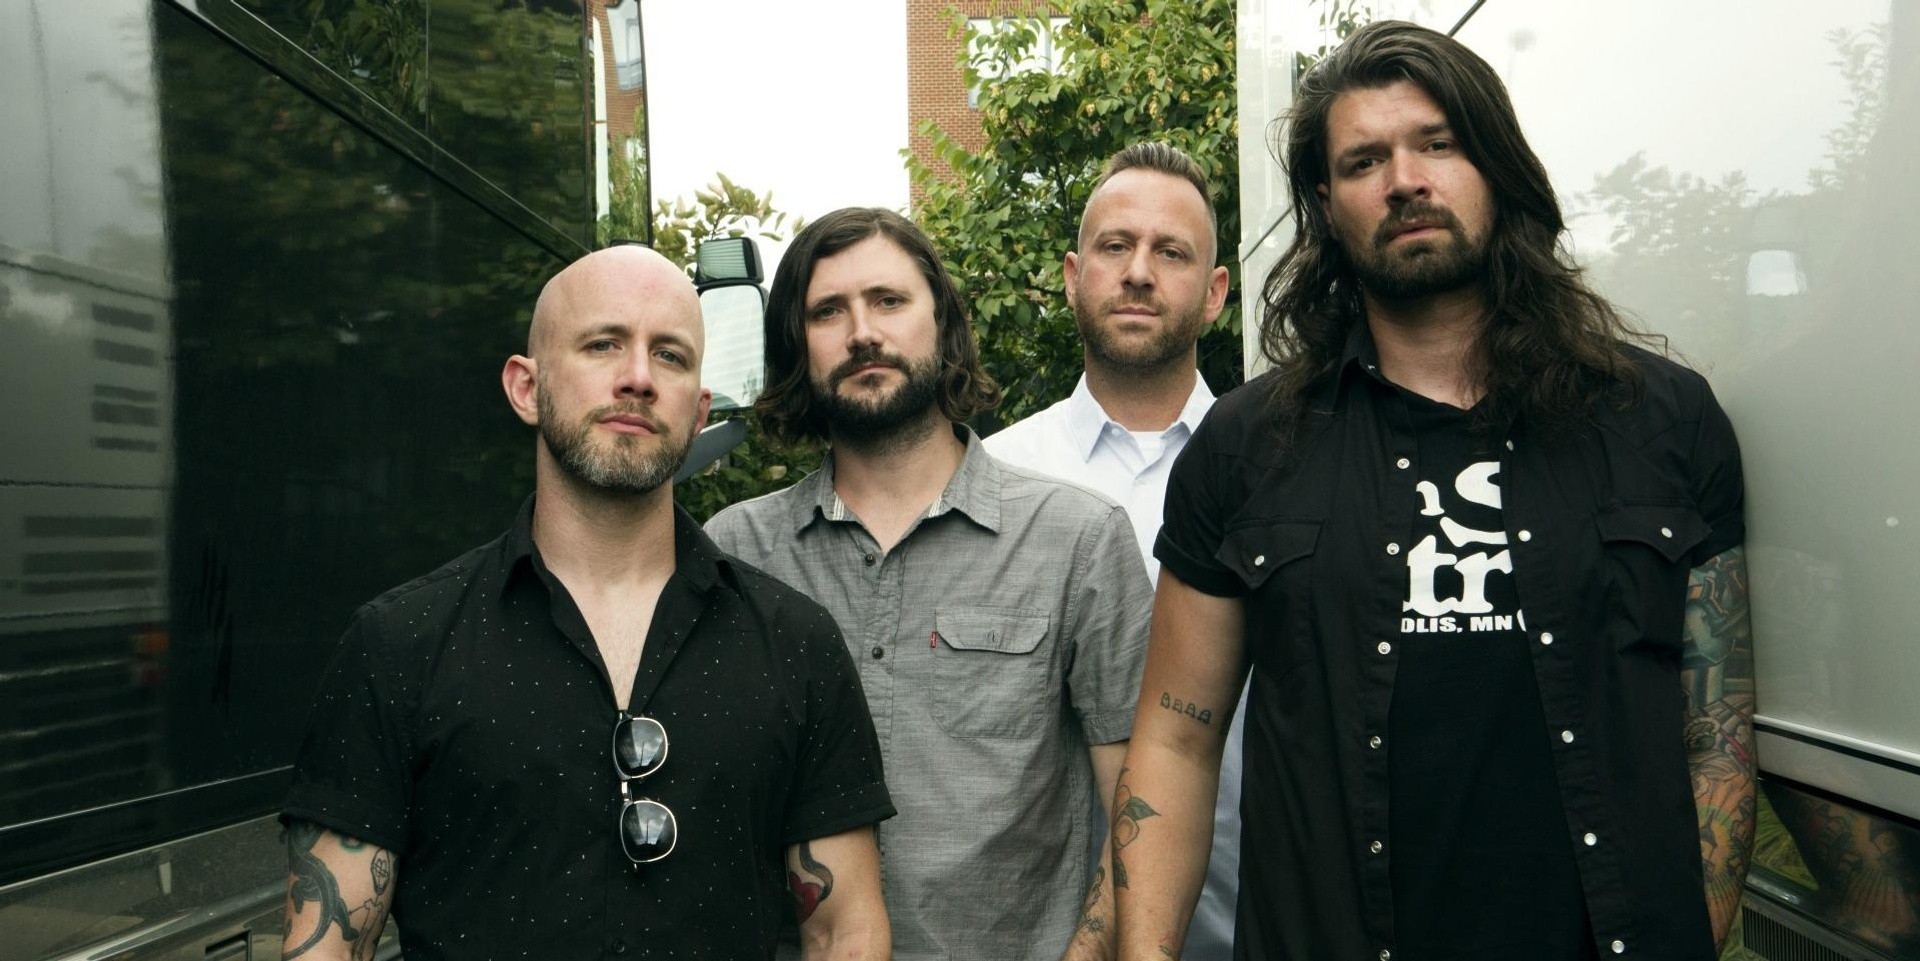 Taking Back Sunday's concert in Singapore will happen at a new venue